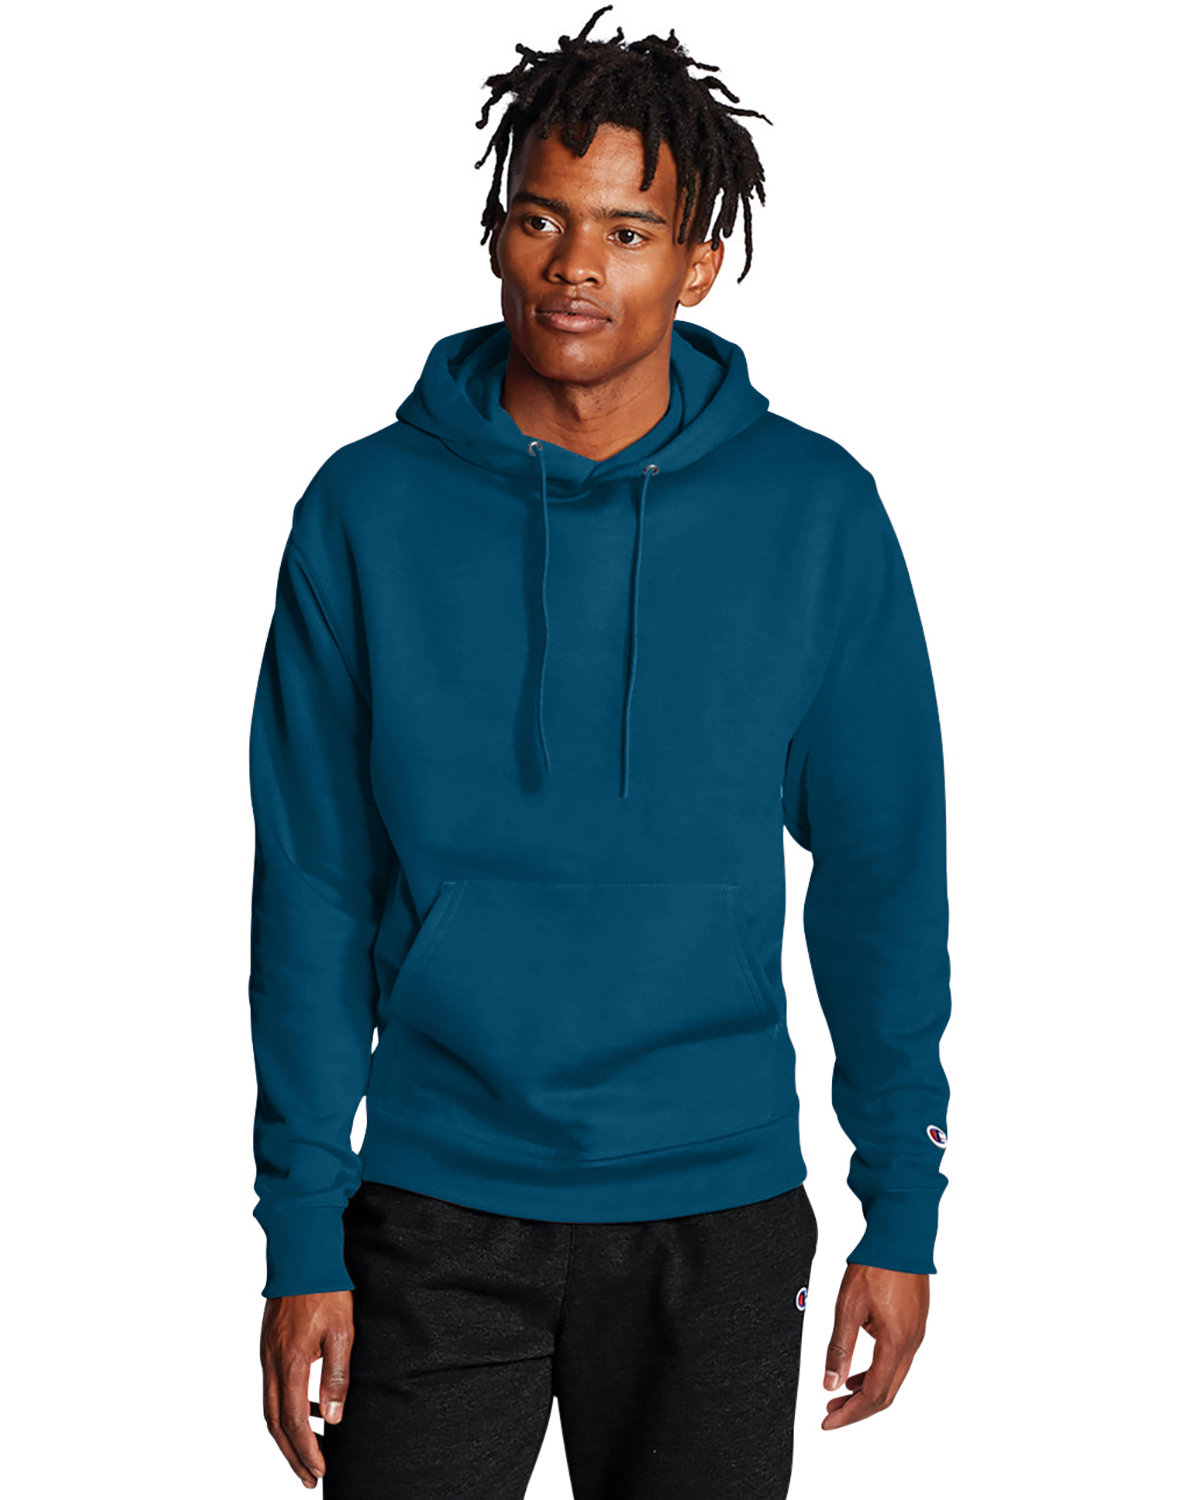 Champion S700 | Adult ShirtSpace | 9 oz. Pullover Hood Powerblend®